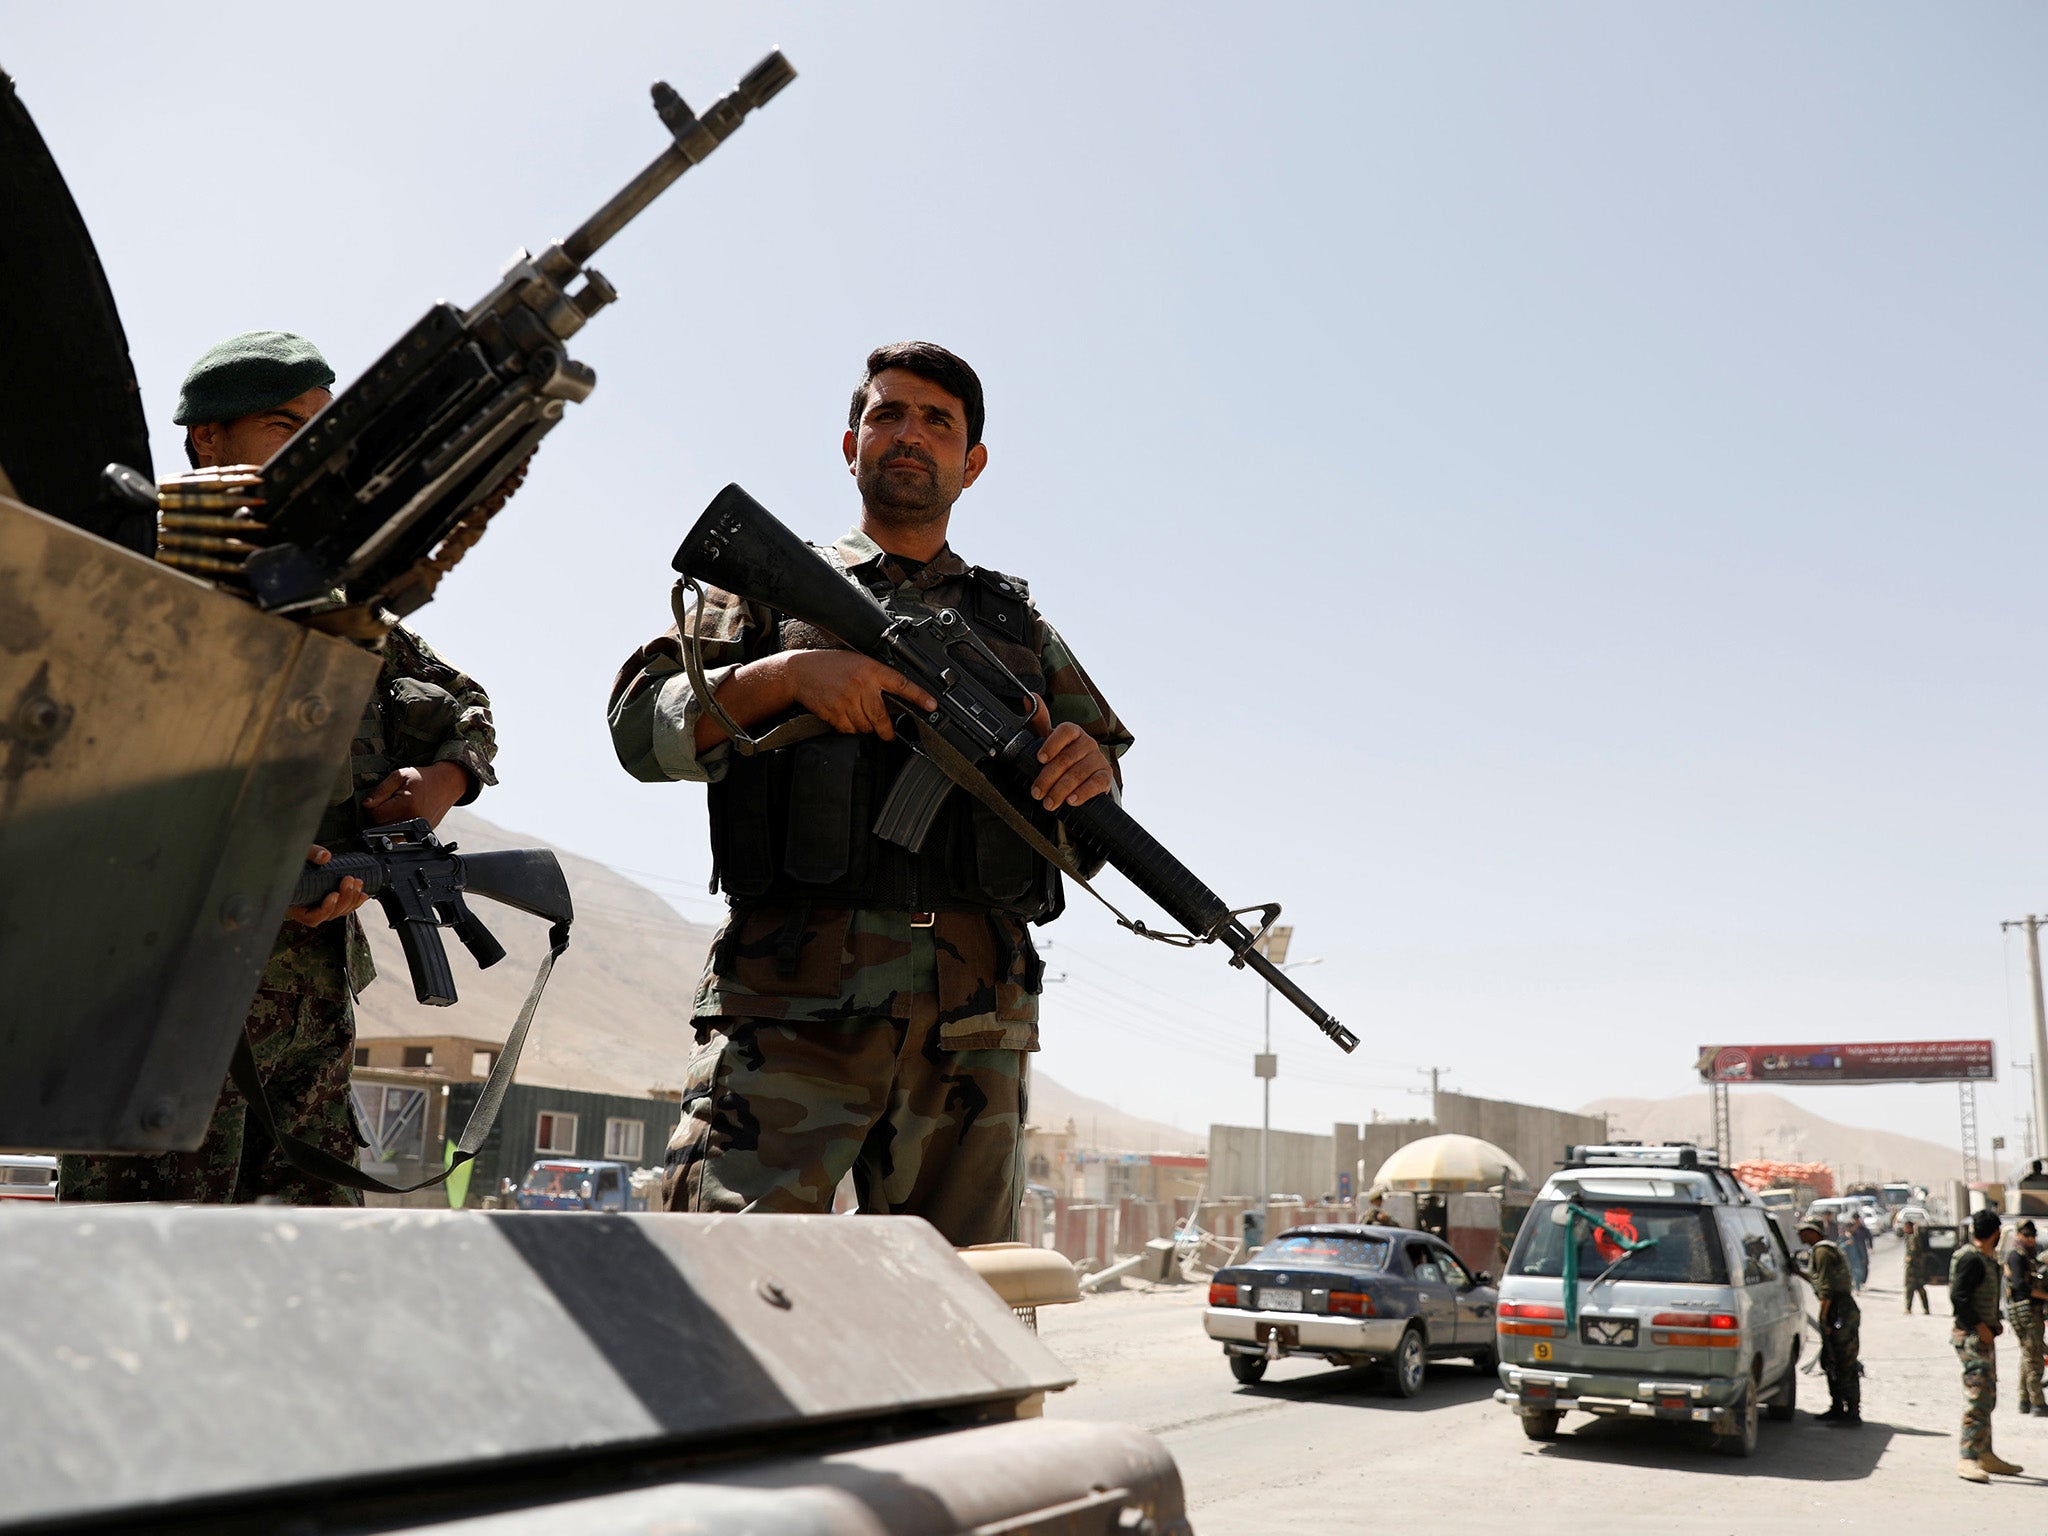 The Taliban attack succeeded in taking control of the base which housed about 140 Afghan troops